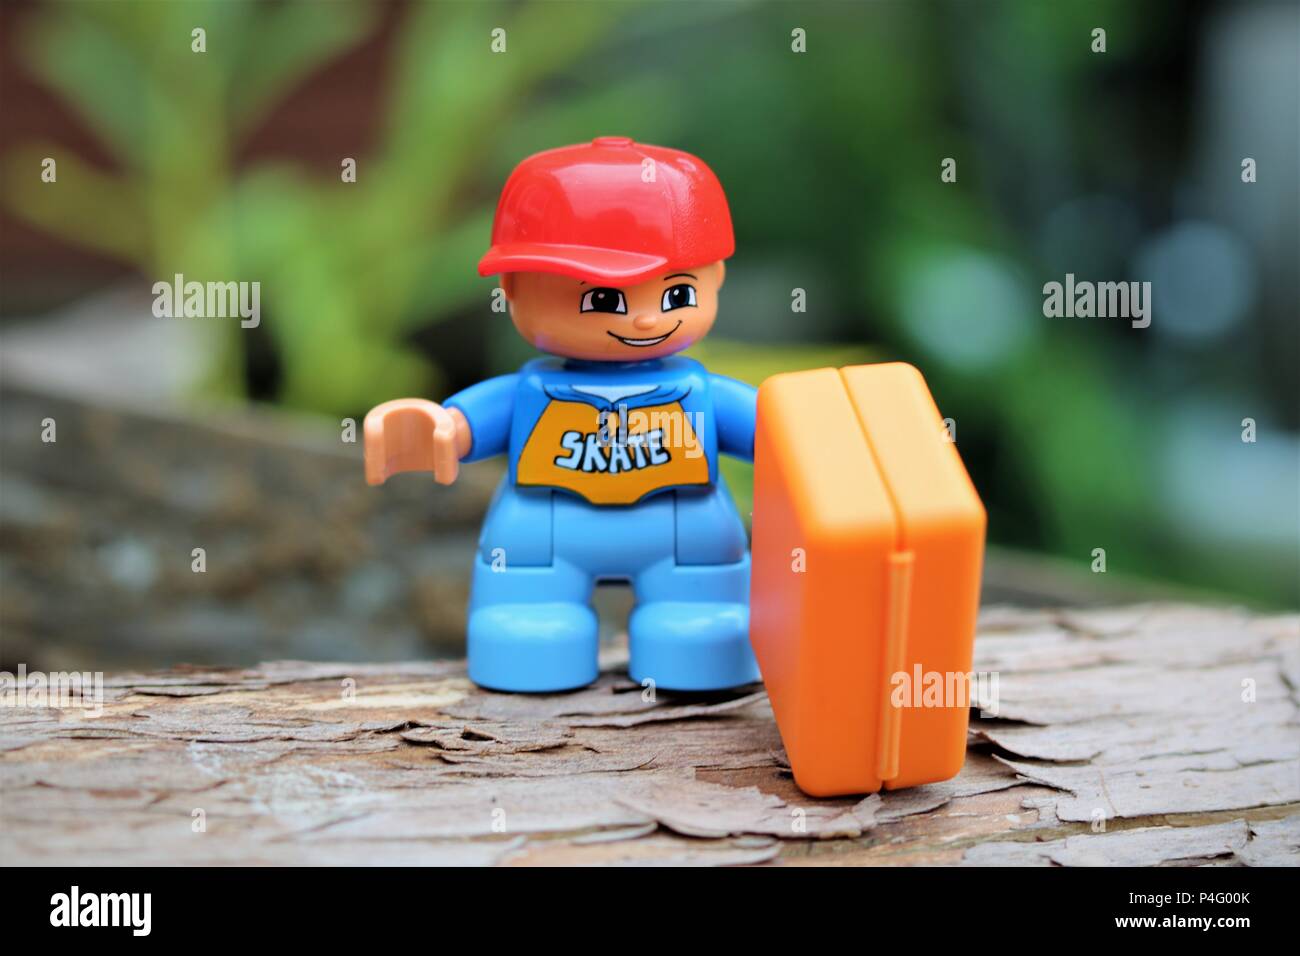 Duplo boy character holding a briefcase and wearing a red cap against a blurred background - News Concept Stock Photo